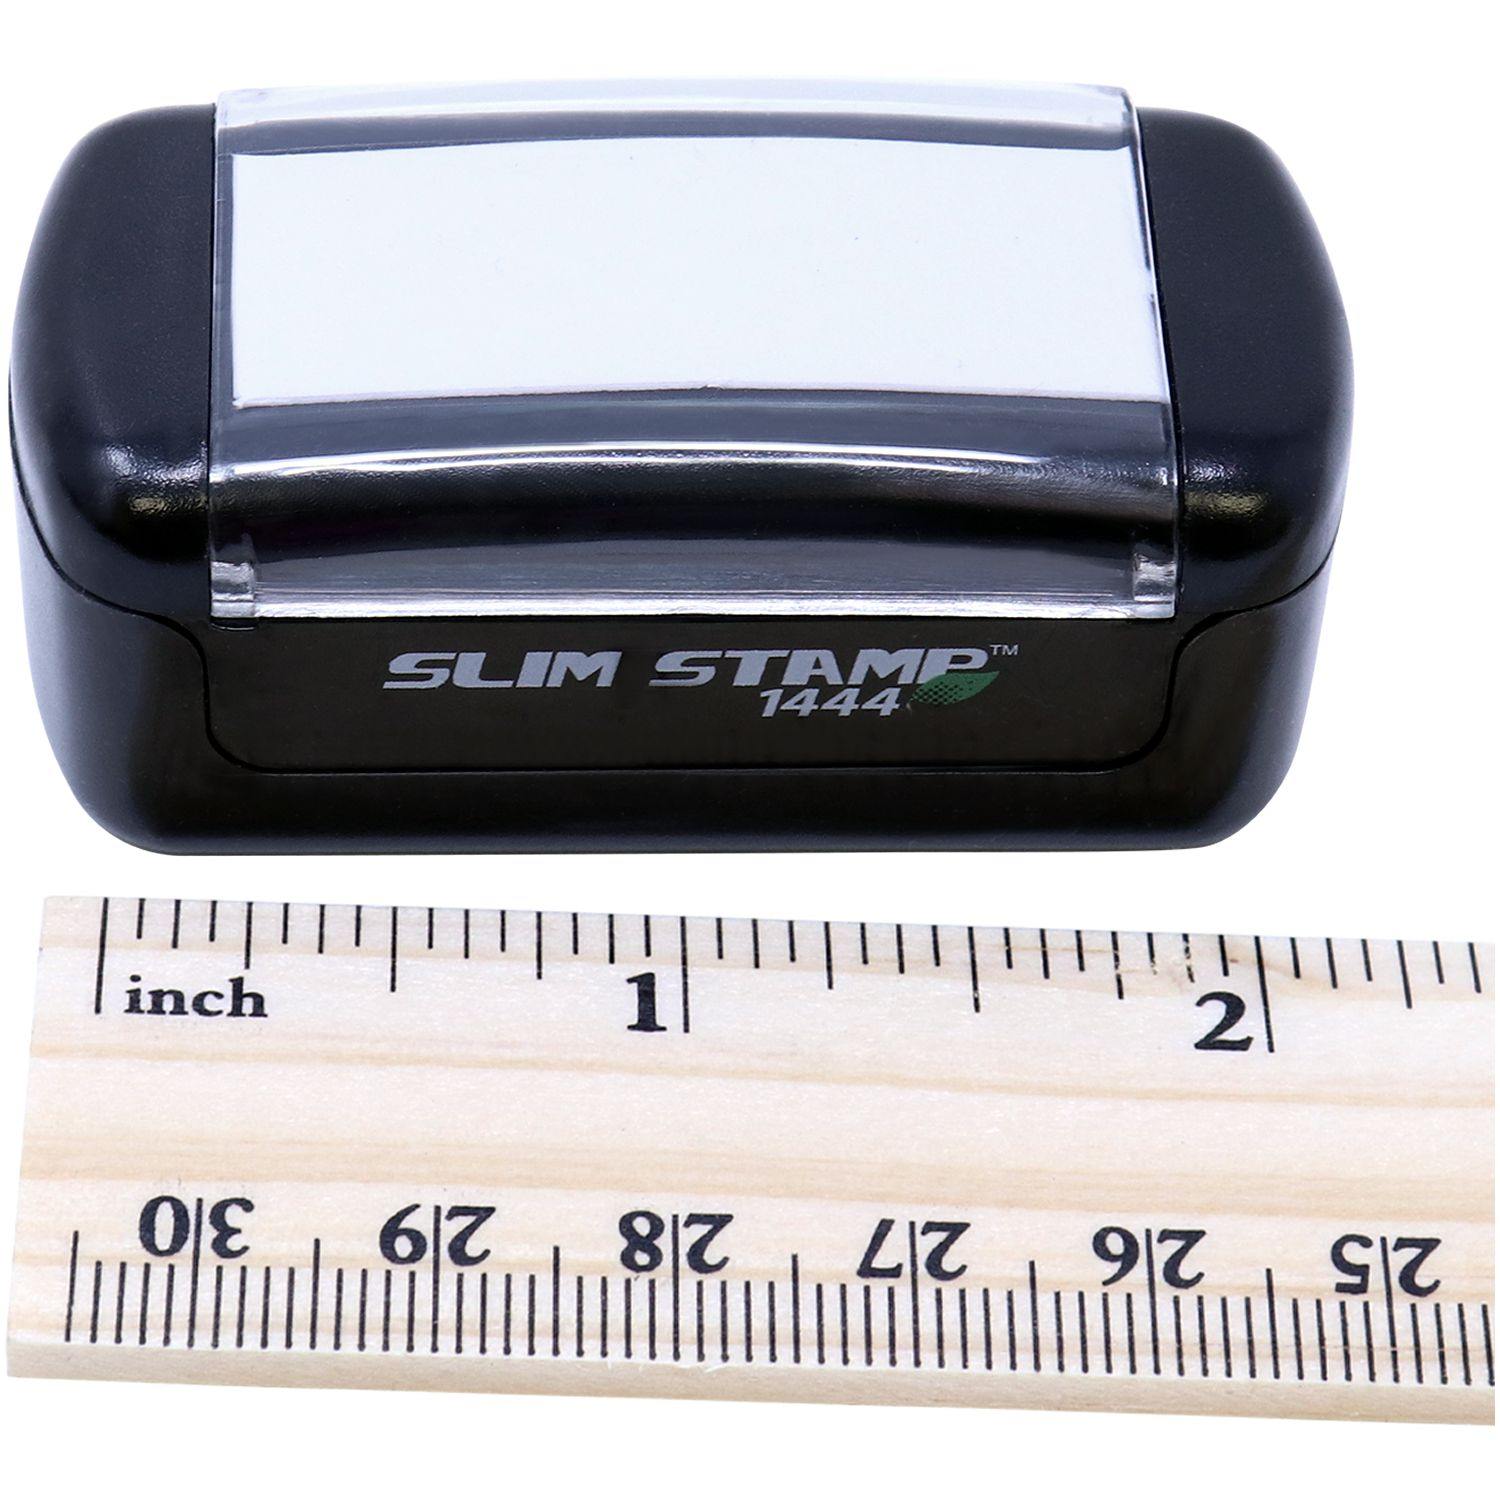 Measurement Slim Pre-Inked You're a Winner Stamp with Ruler